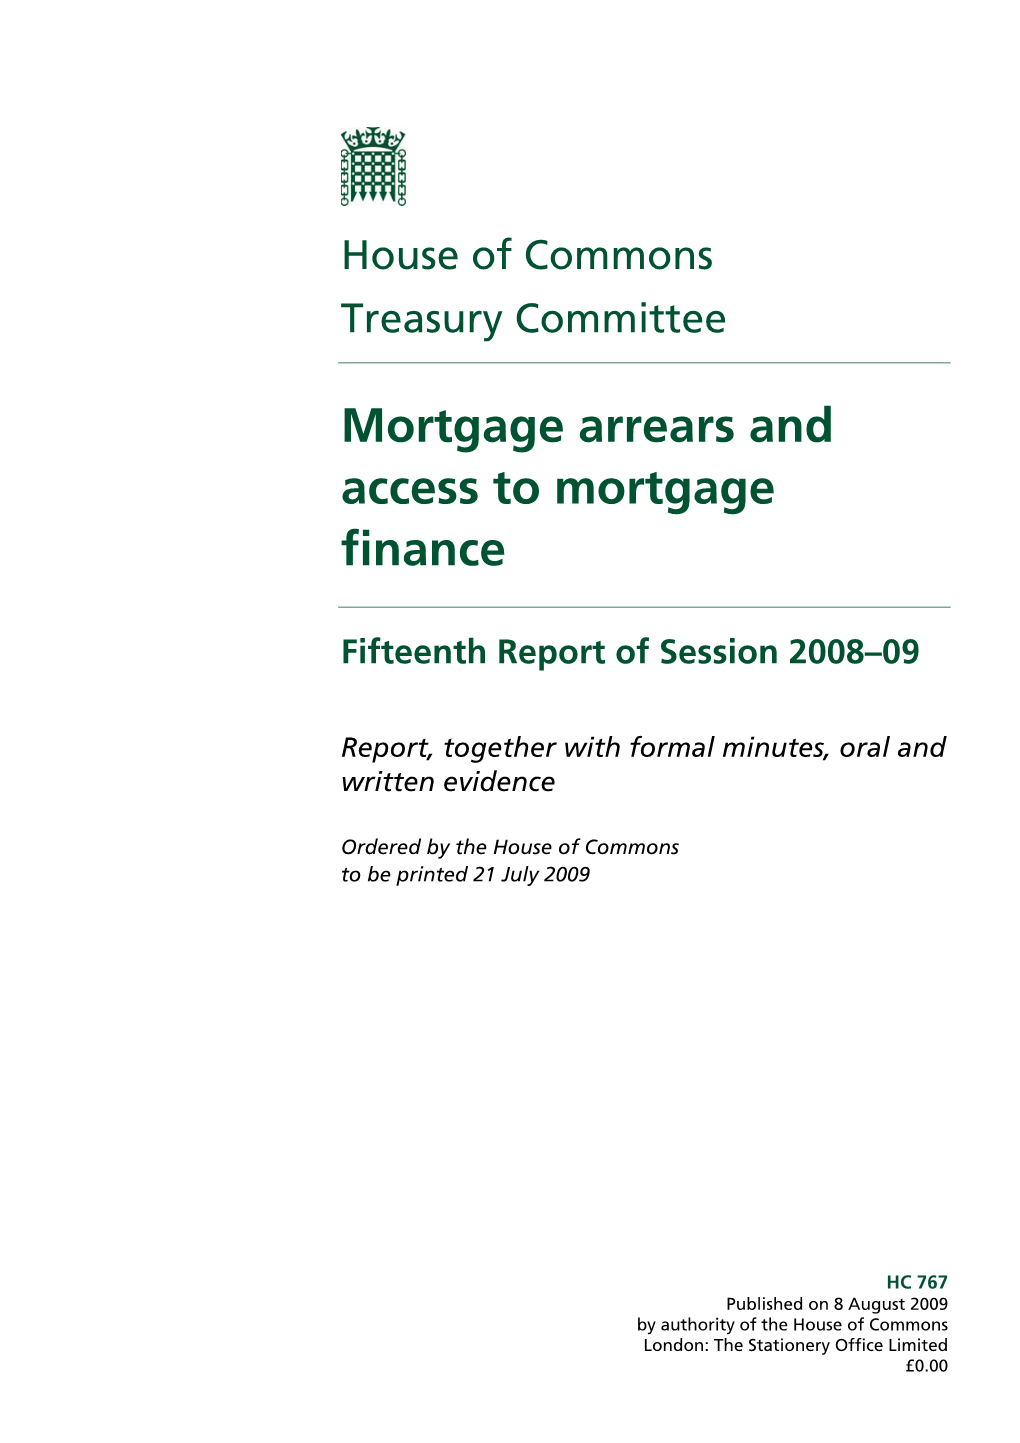 Mortgage Arrears and Access to Mortgage Finance